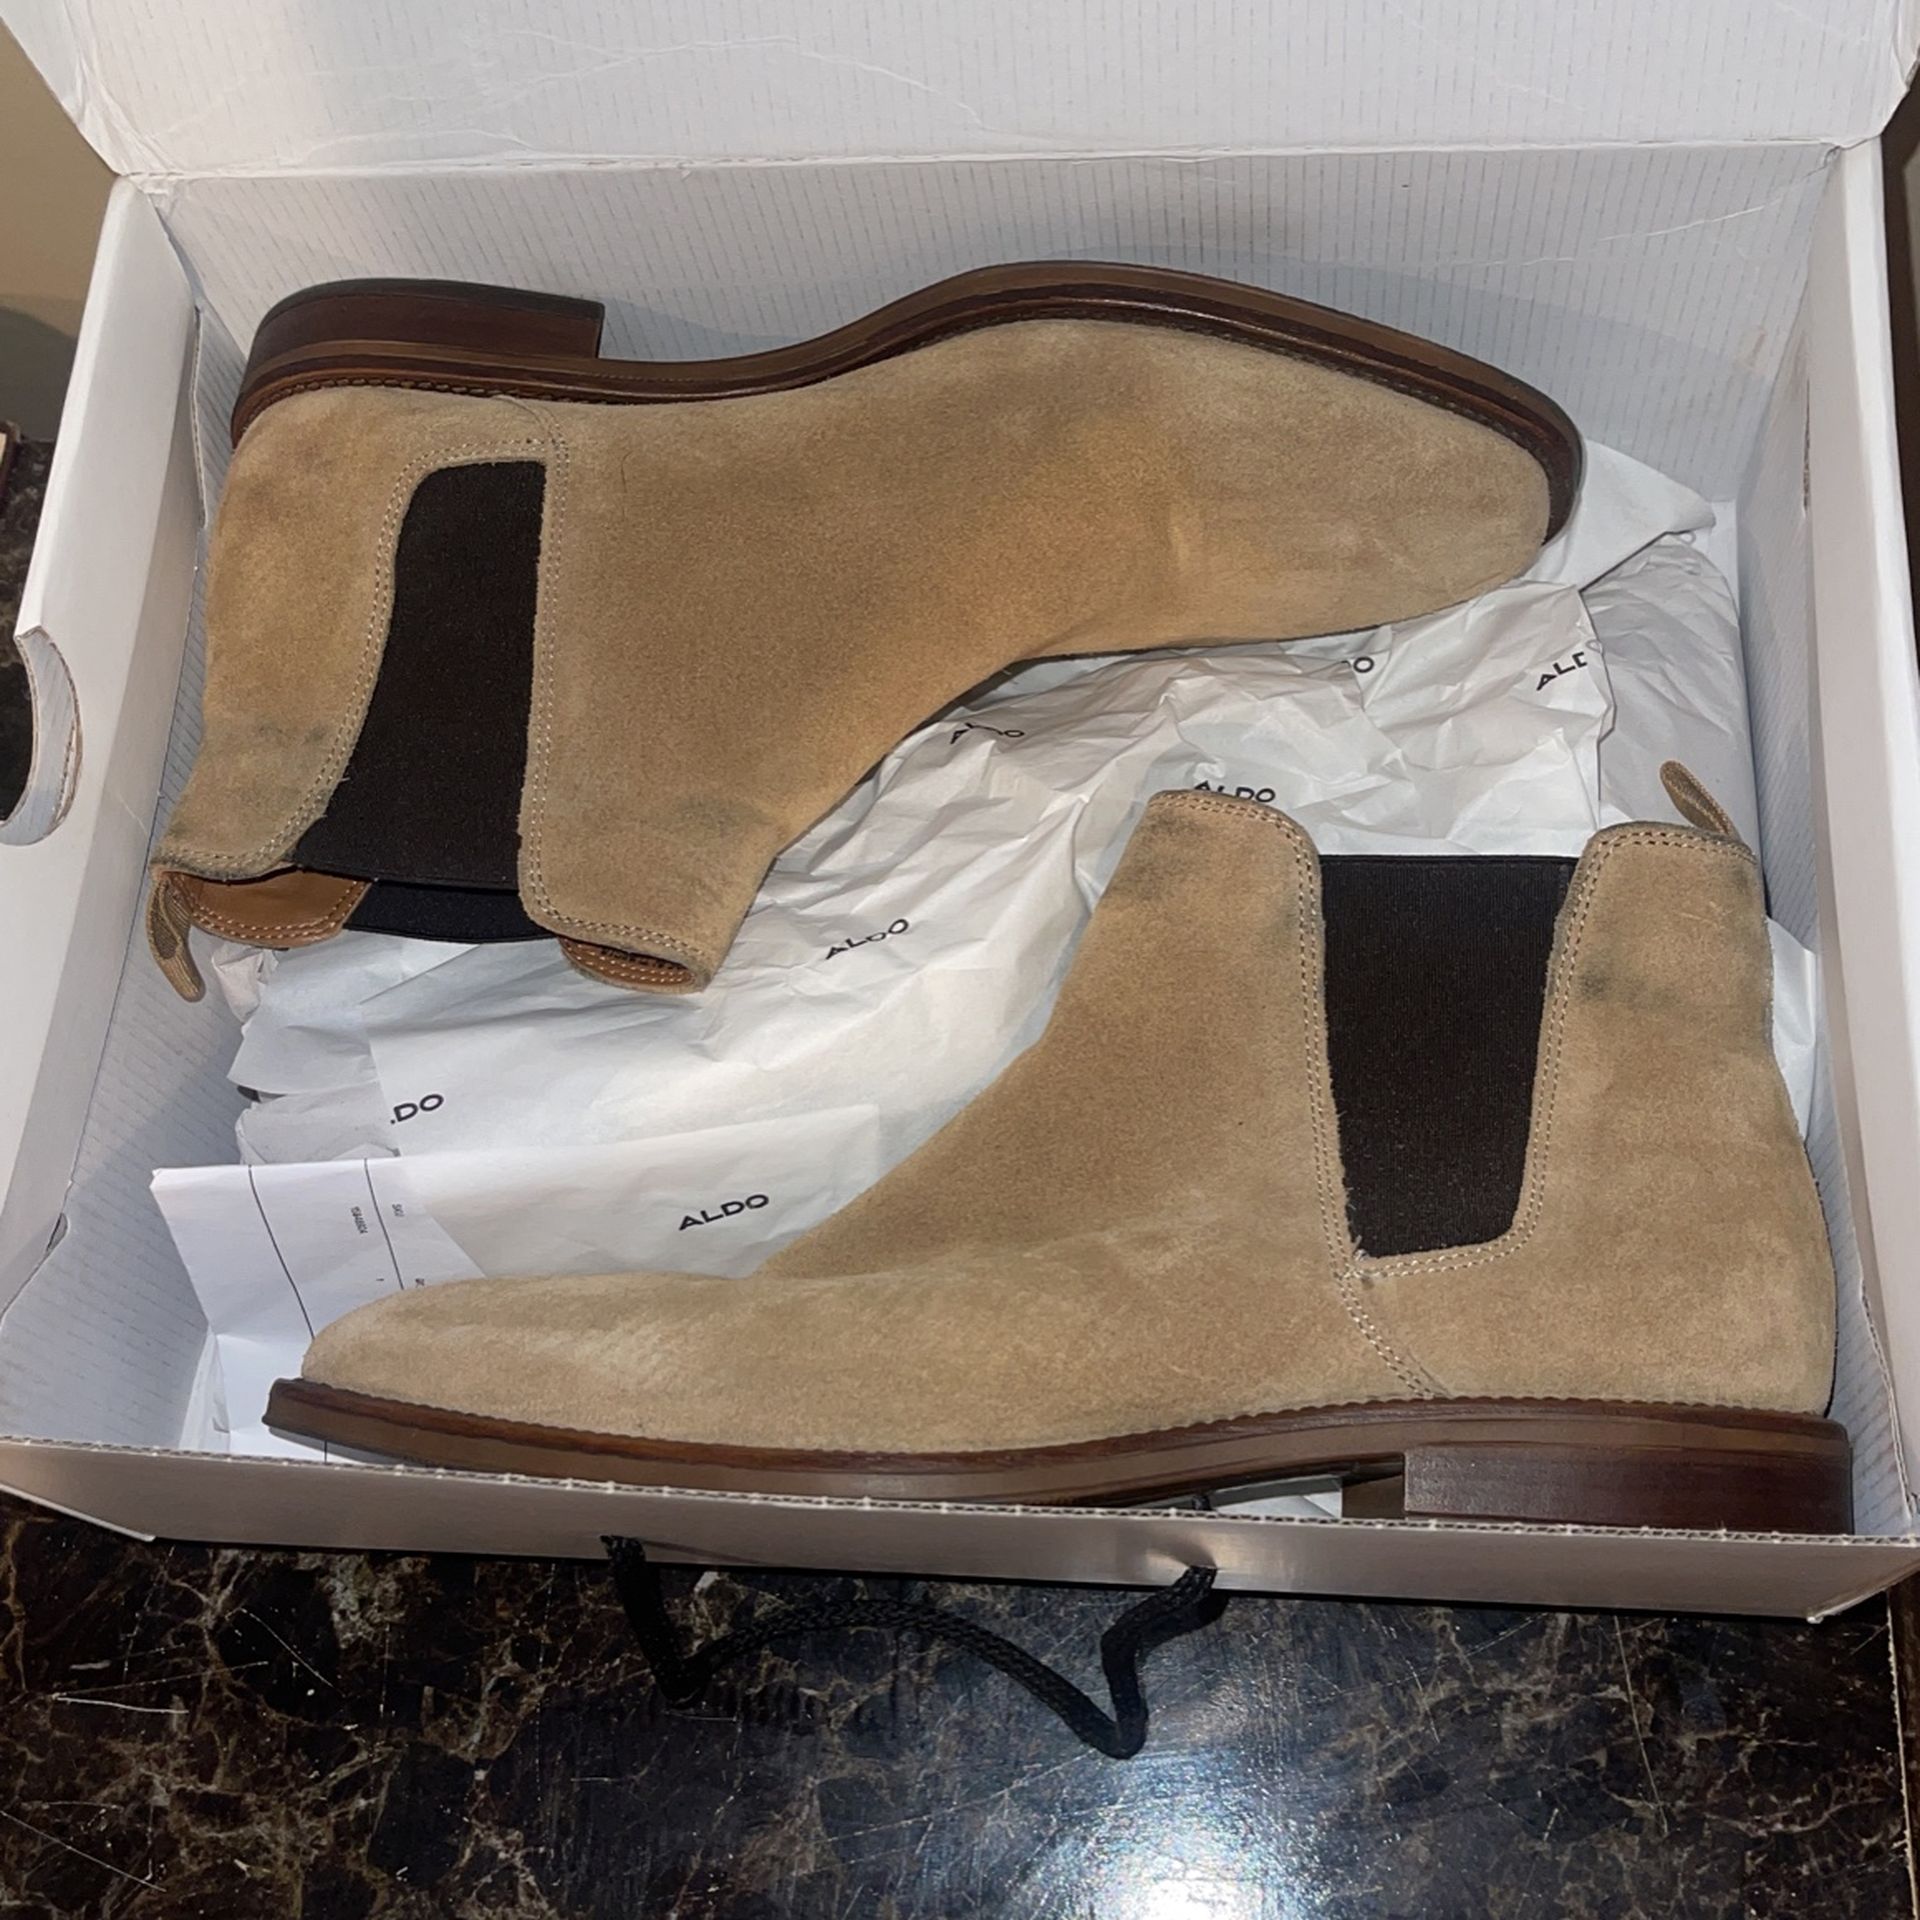 Chelsea boots in light brown leather suede size 8 in men